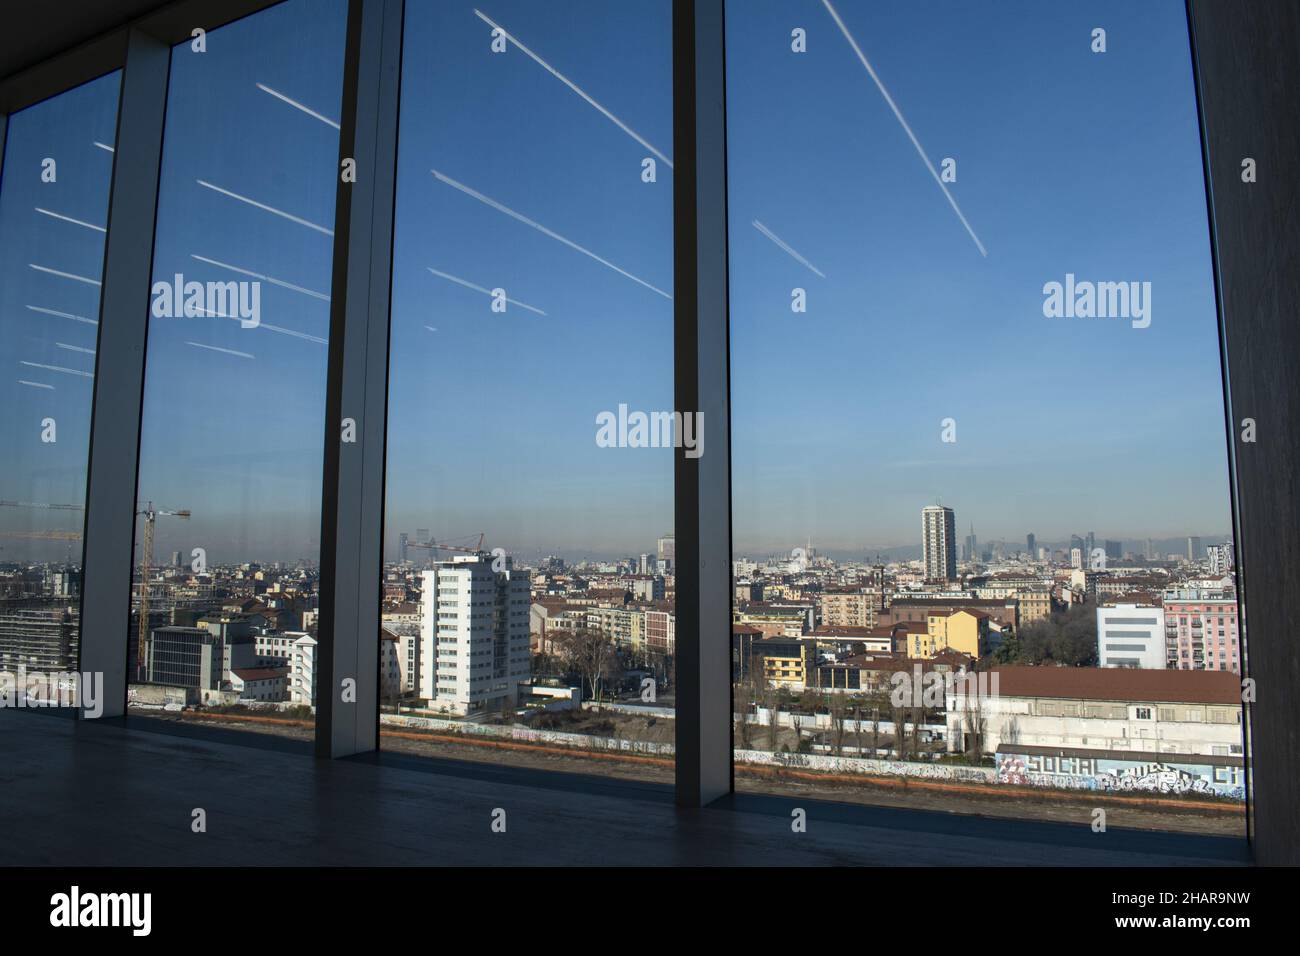 Milan, Italy: The city skyline seen from the windows of the Tower of the Fondazione Prada, the building 60 meters high designed by Rem Koolhaas Stock Photo